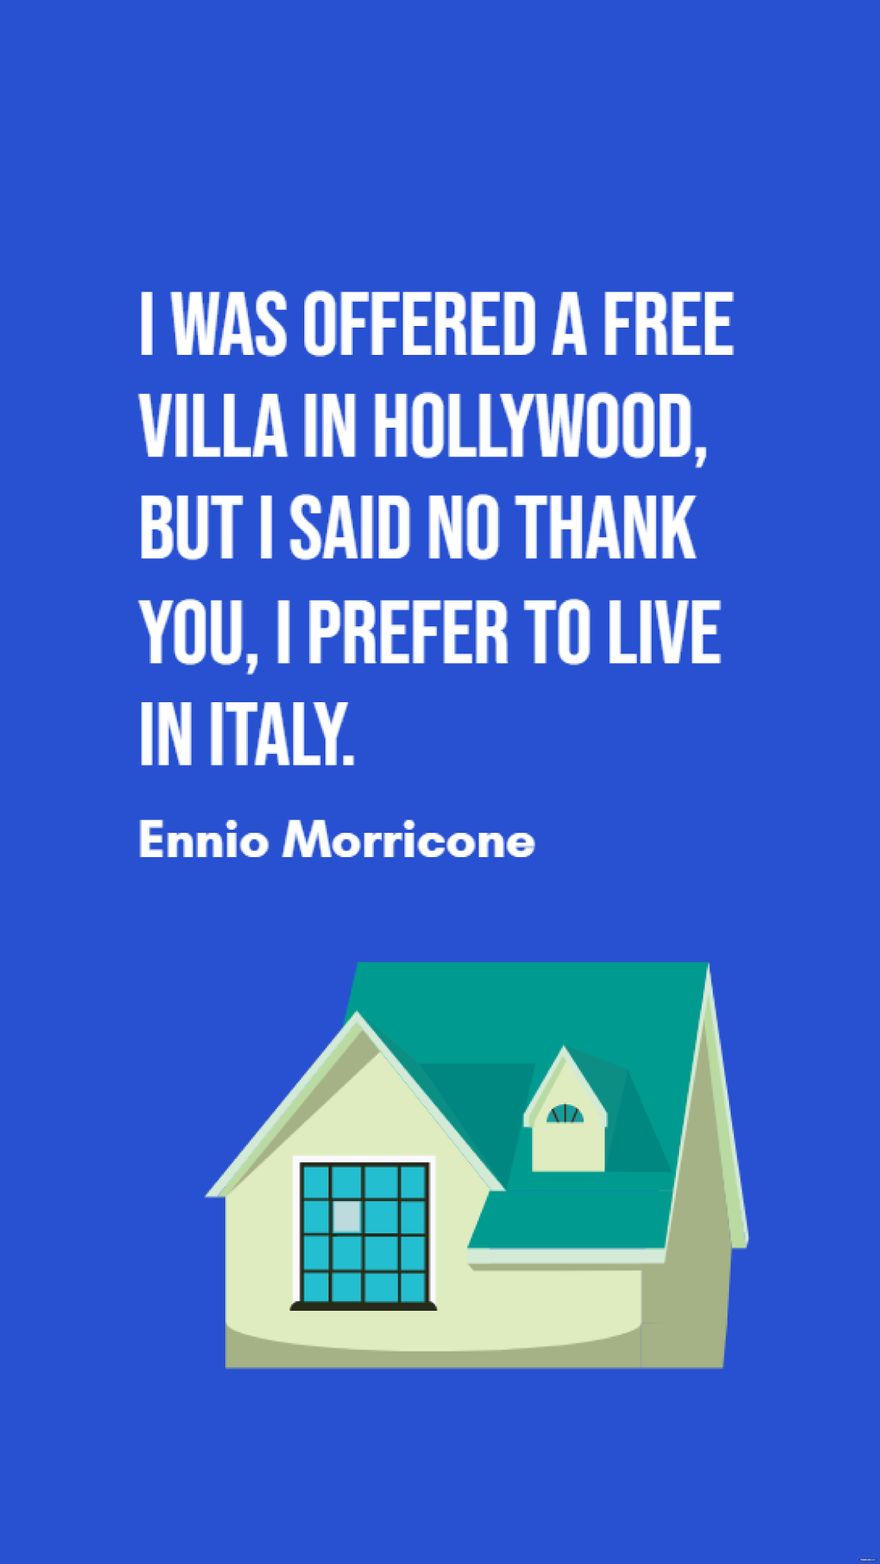 Ennio Morricone - I was offered a villa in Hollywood, but I said no thank you, I prefer to live in Italy. in JPG